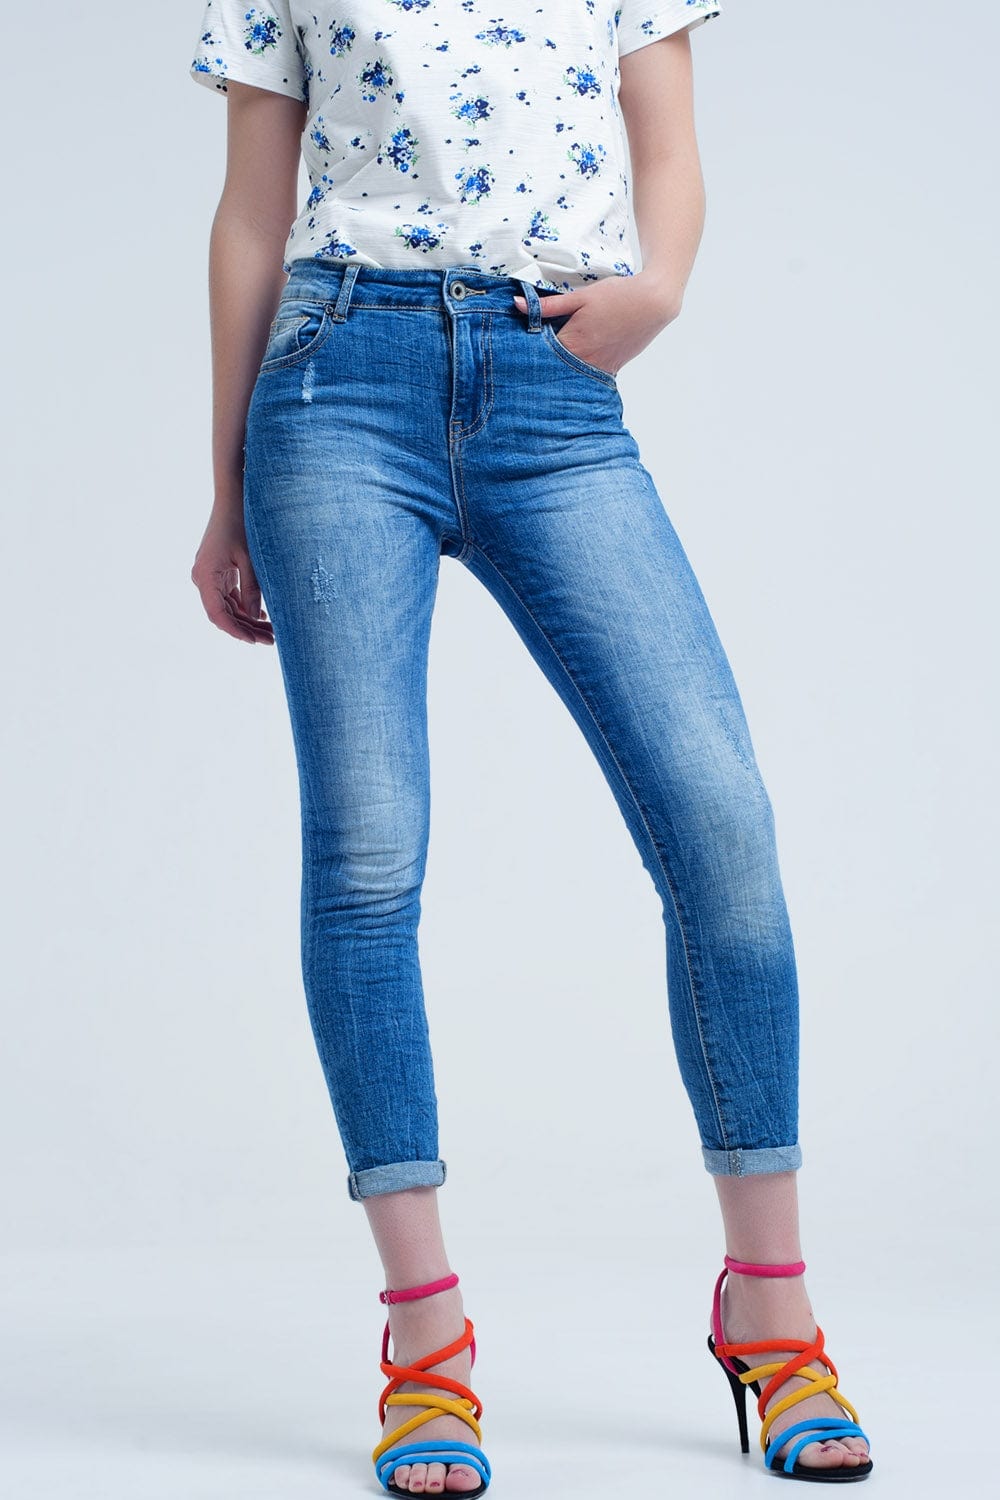 Q2 Jeans skinny jeans with worn color and wrinkles